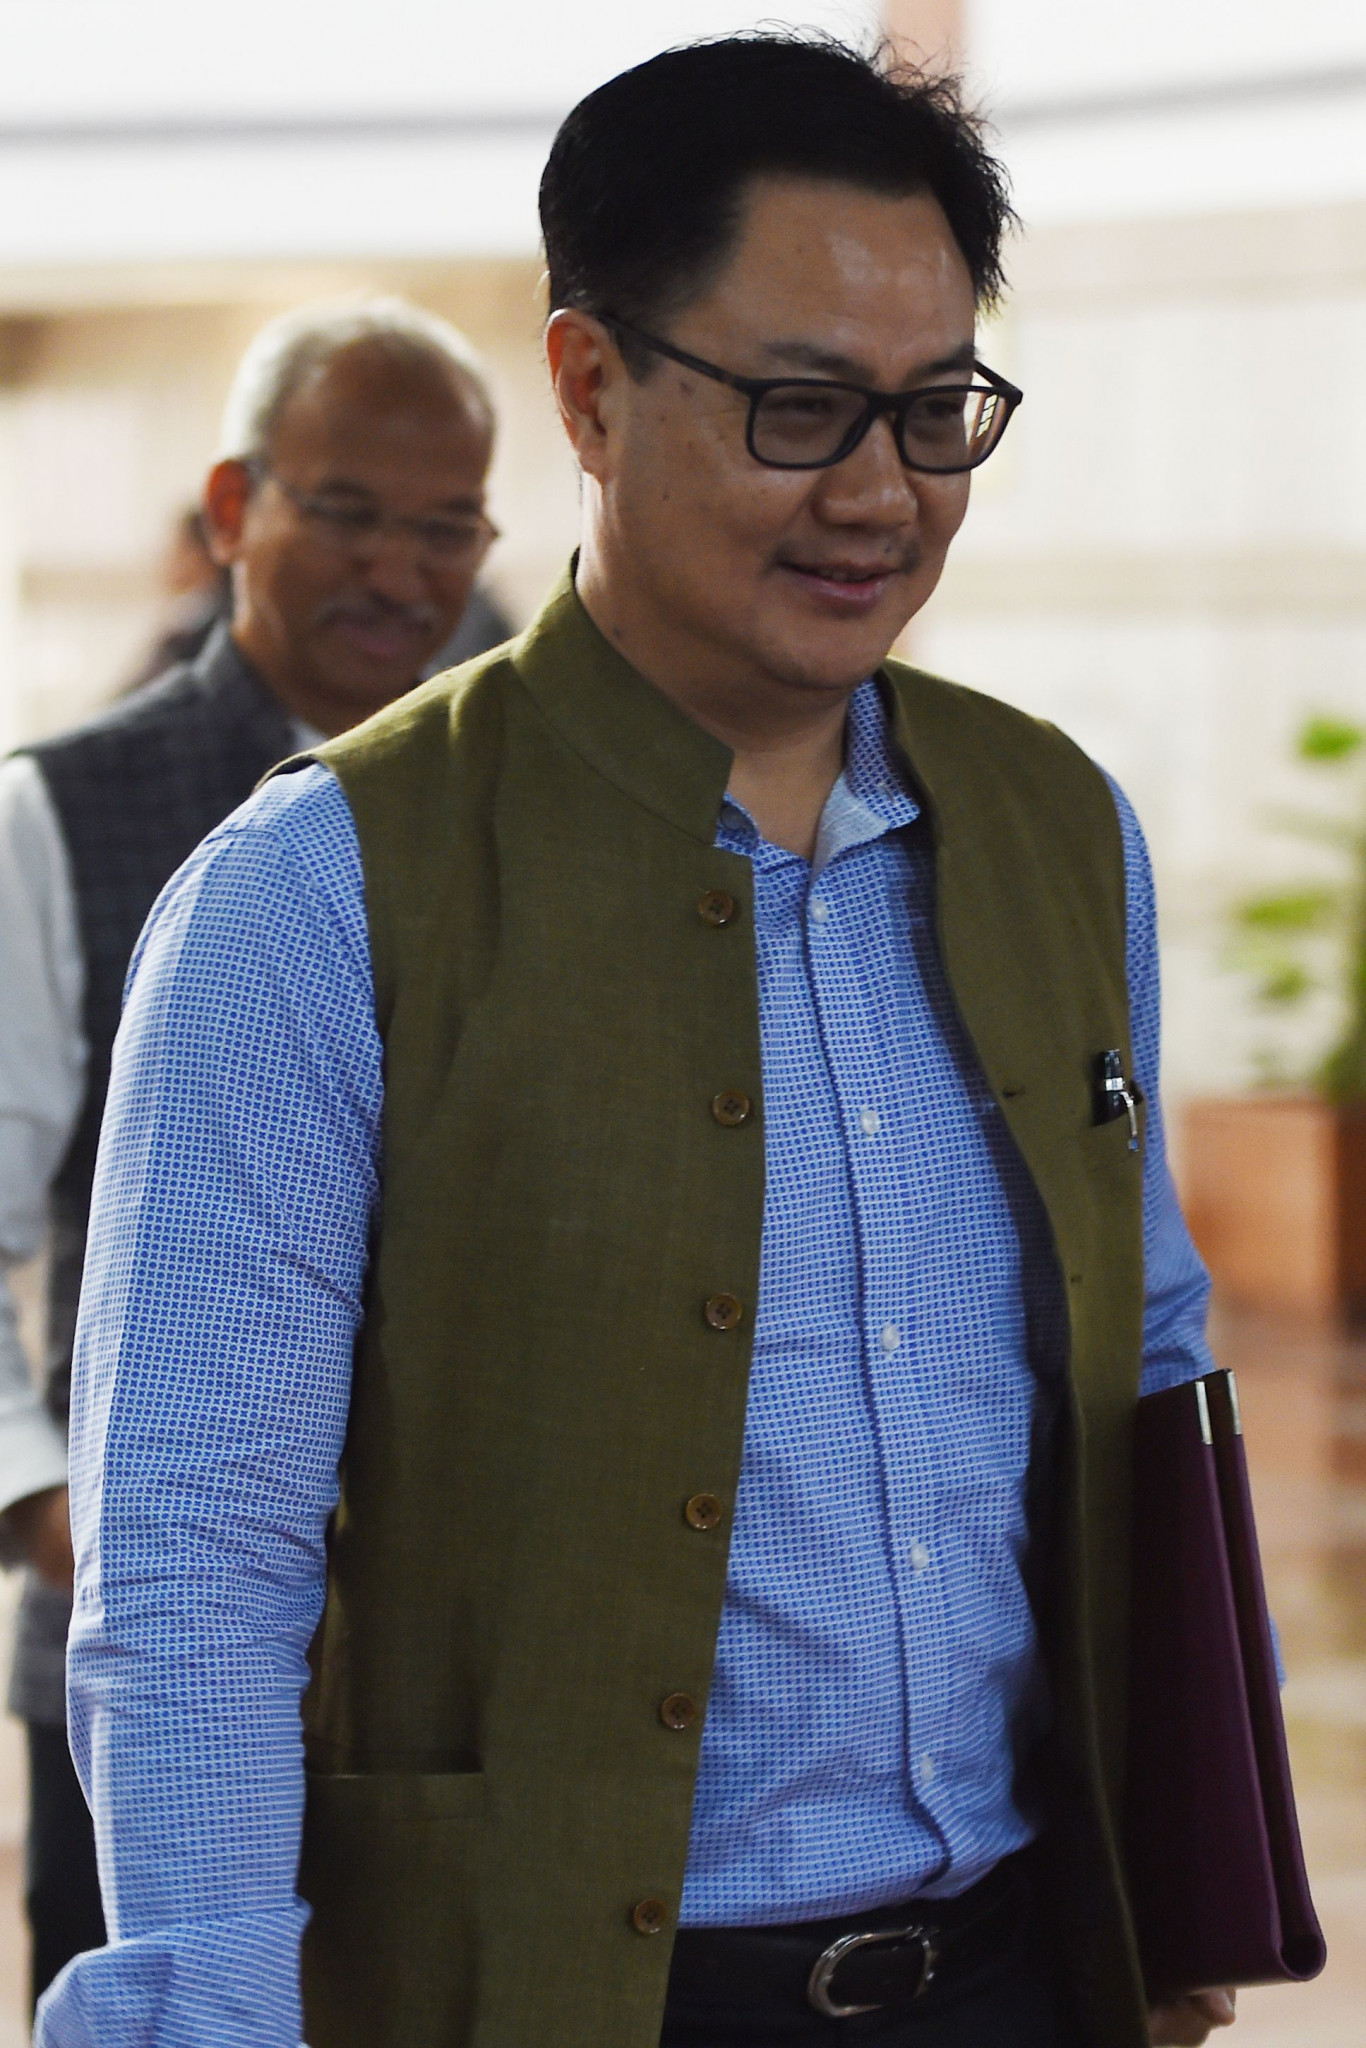 India's Sport Minister Kiren Rijiju has claimed that there will be no disruptions to the hosting of the Asian Wrestling Championships, despite the coronavirus crisis in China ©Getty Images